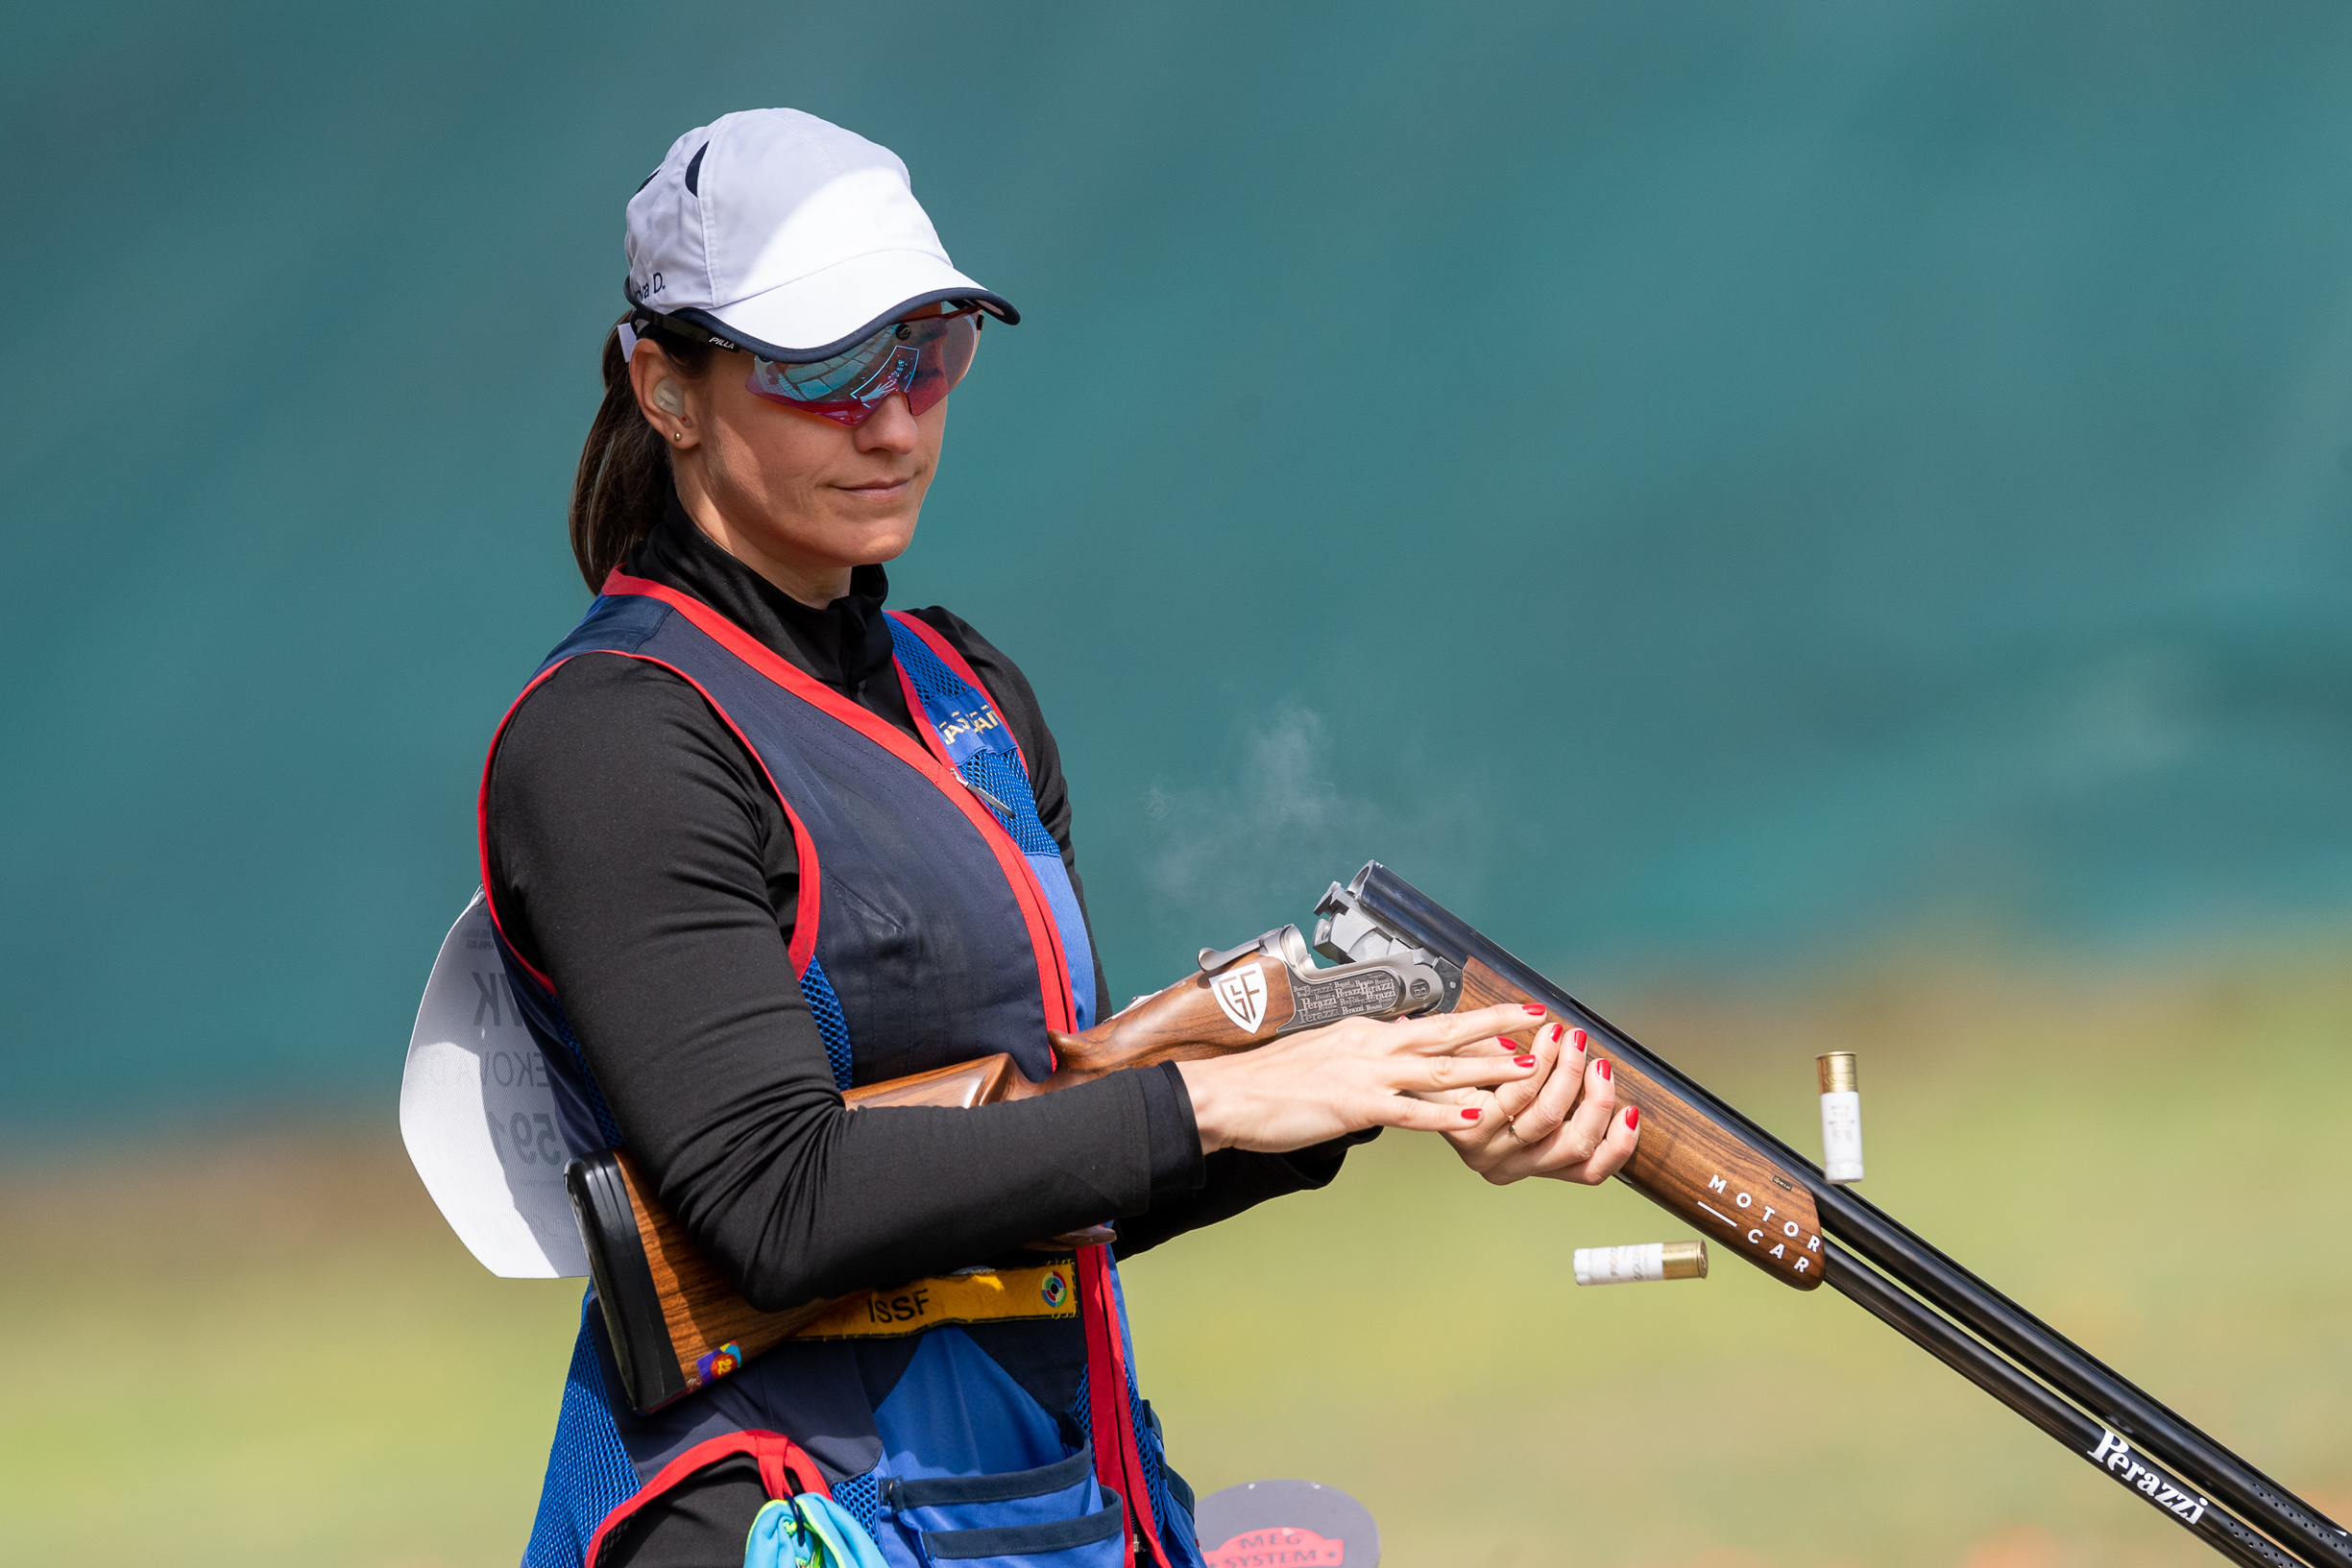 ISSF WORLD CUP SHOTGUN: FIOCCHI TEAM READY TO WIN GOLD IN CAIRO